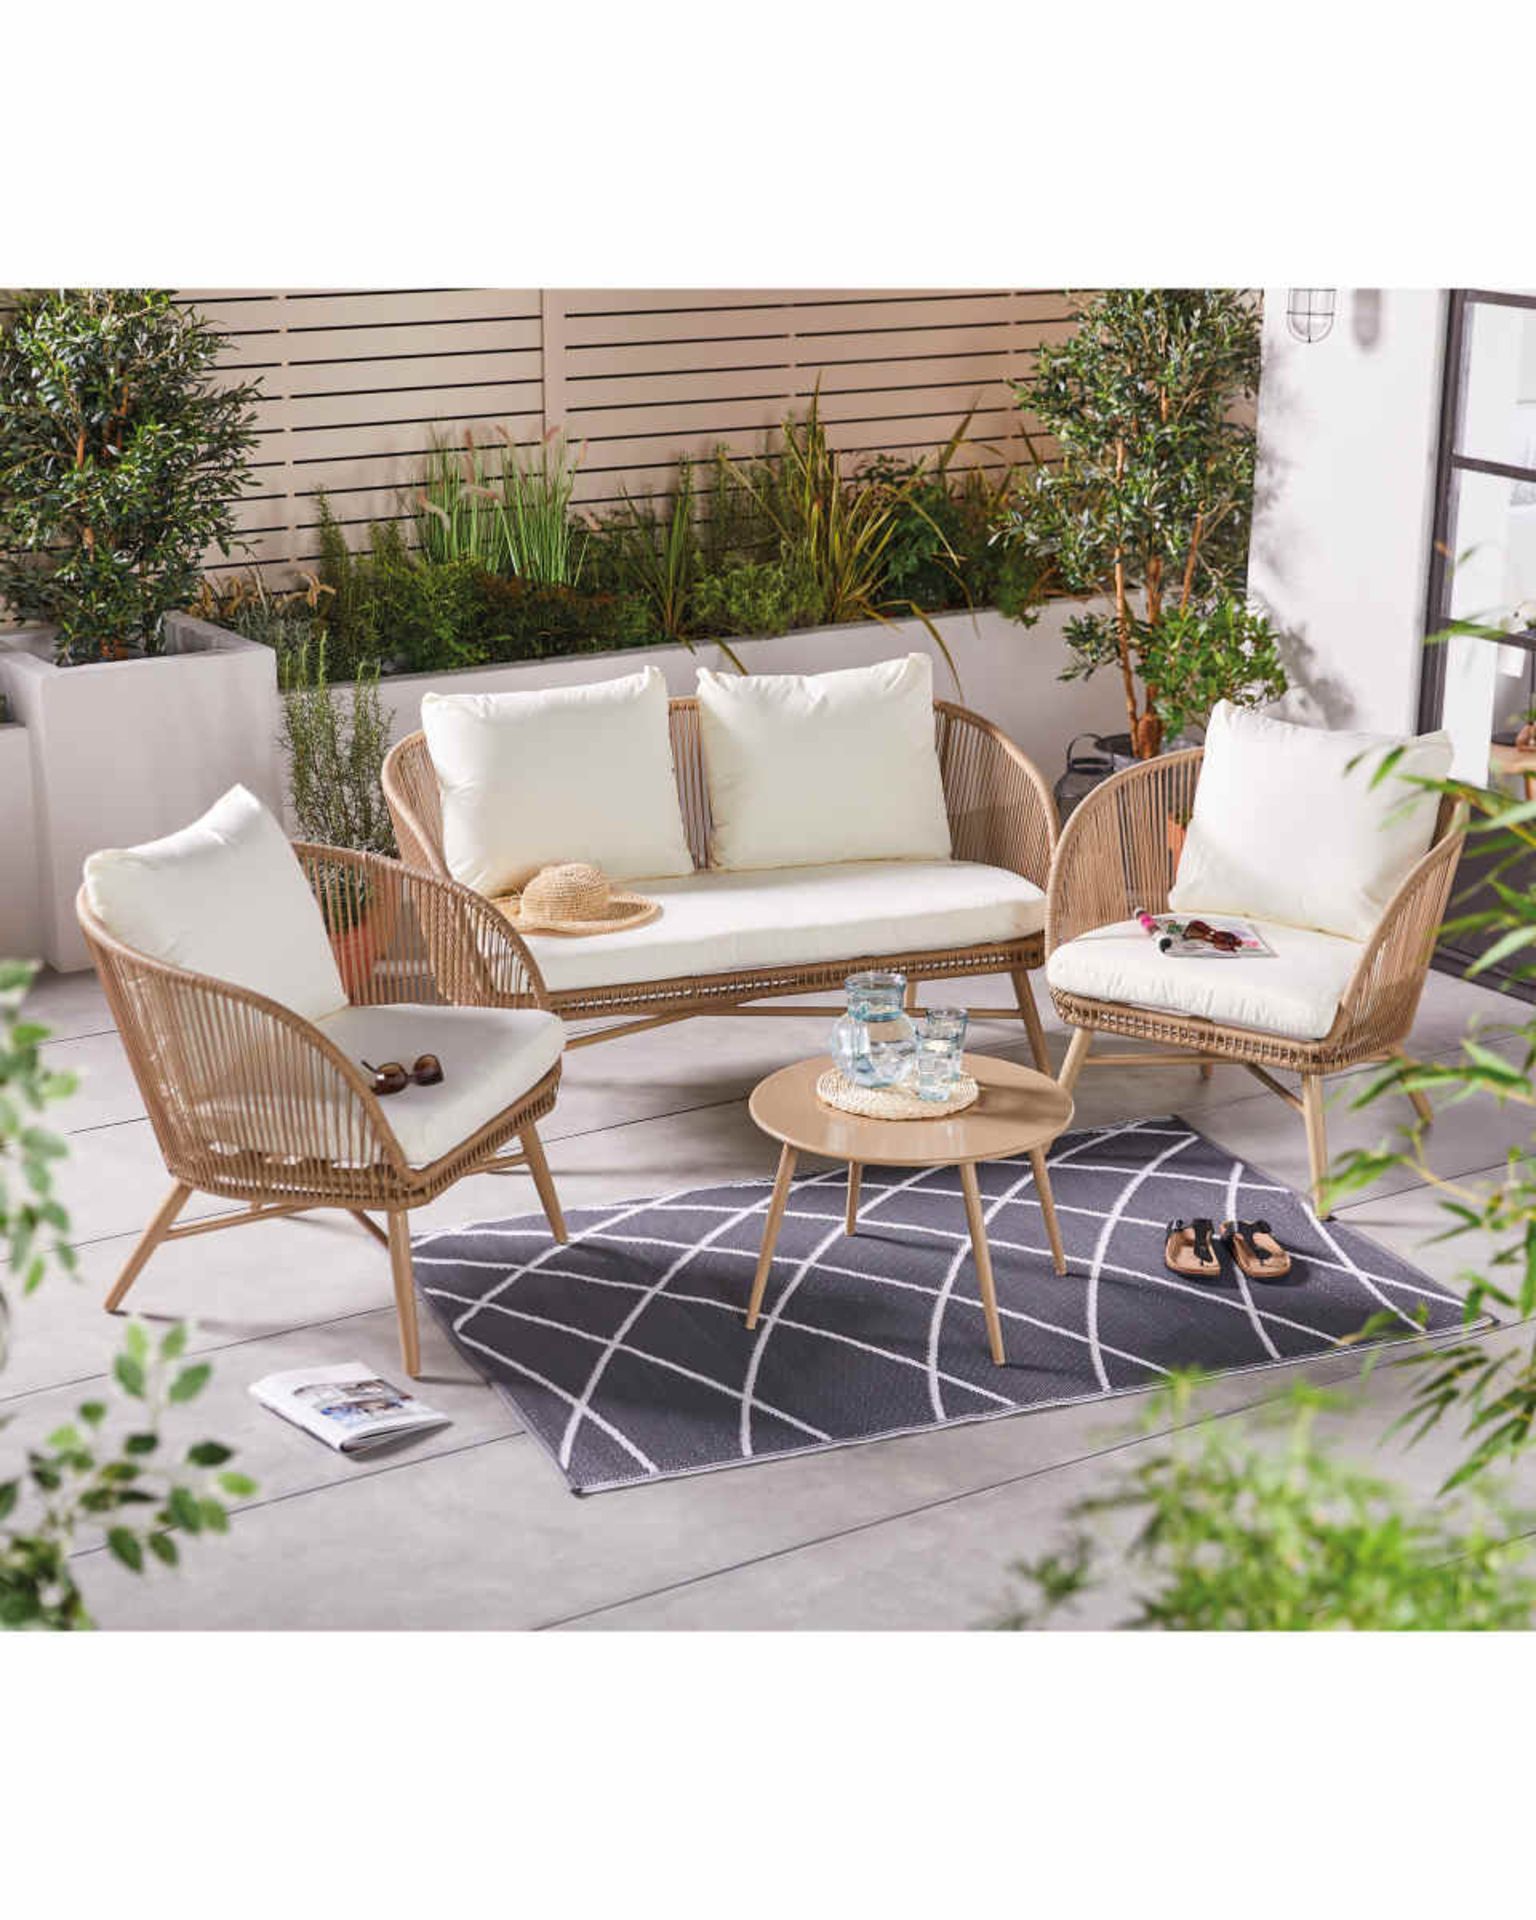 Rope Effect Furniture Set. Enjoy those lazy days in the garden with this comfortable and stylish - Image 2 of 2